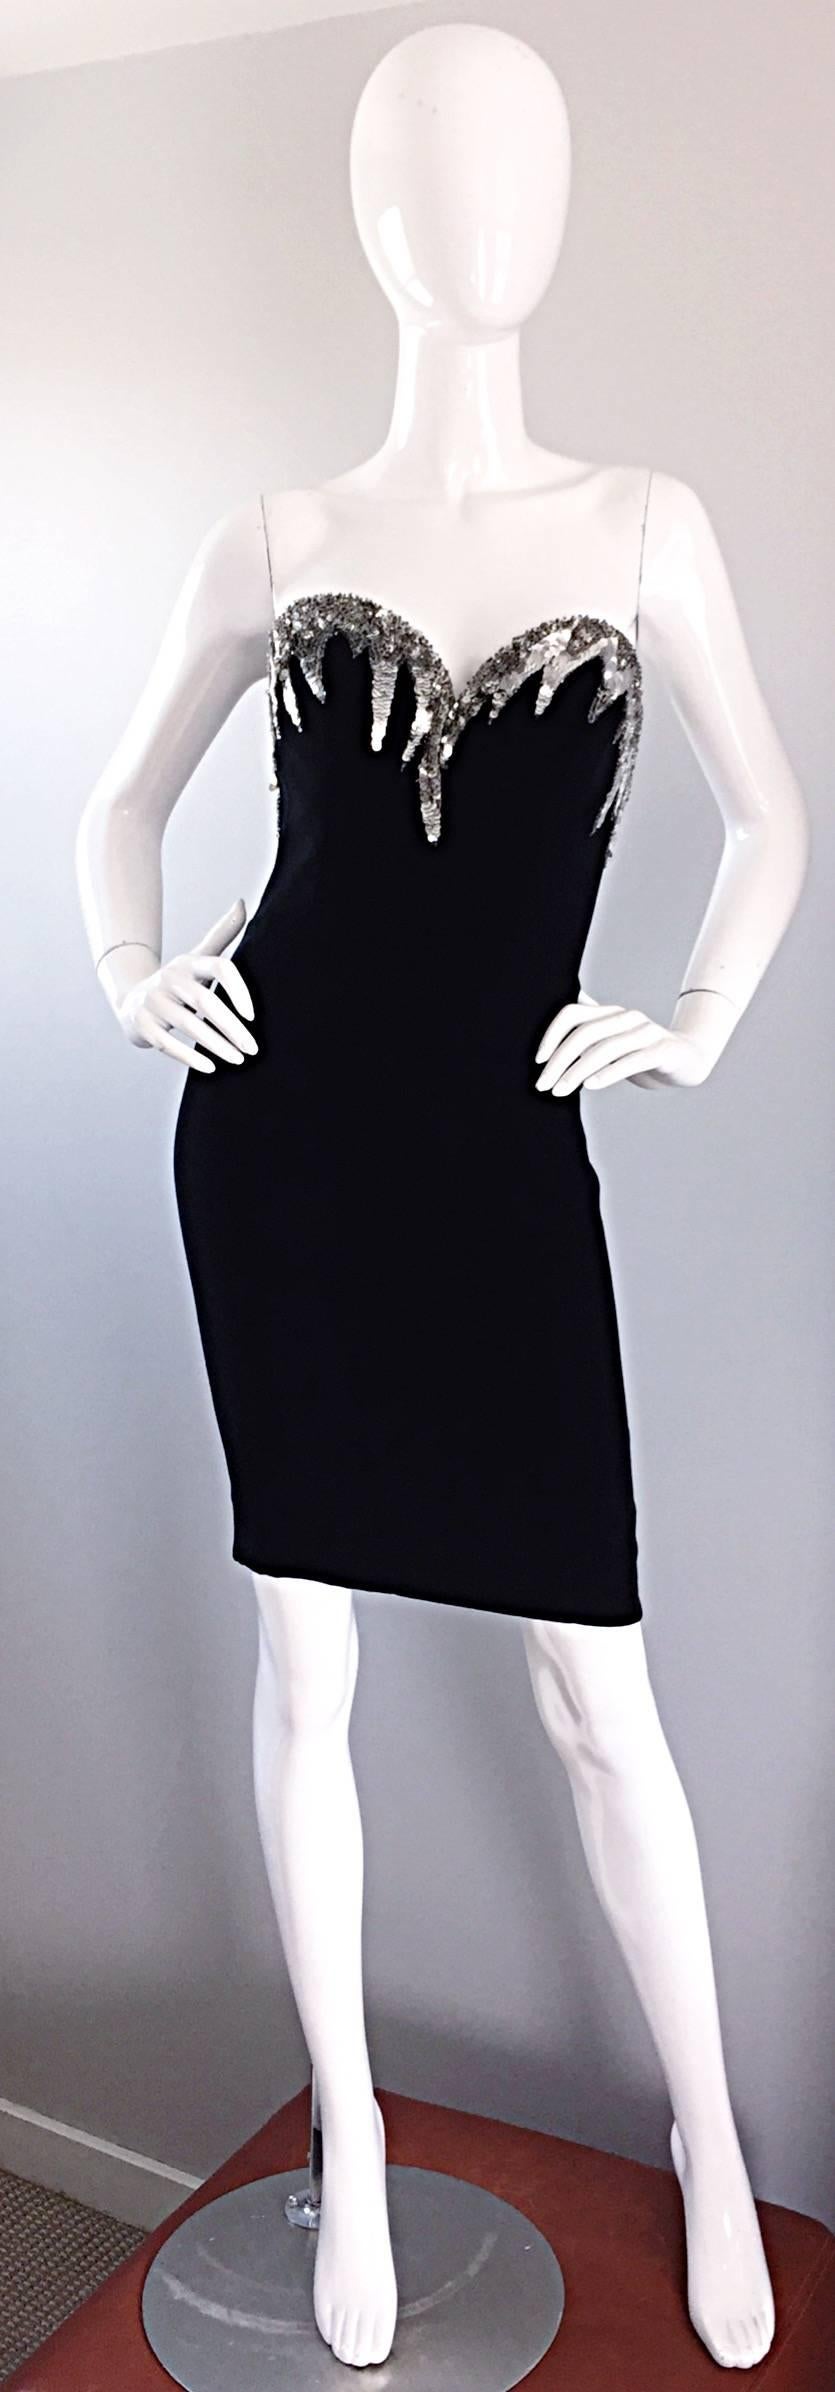 Sexy, yet sophisticated vintage BOB MACKIE black bodcon strapless dress, with silver sequins hand-sewn around the front and back bodice! Sensational fitted dress with built in support, and is boned. Fully lined. Hidden zipper up the back with